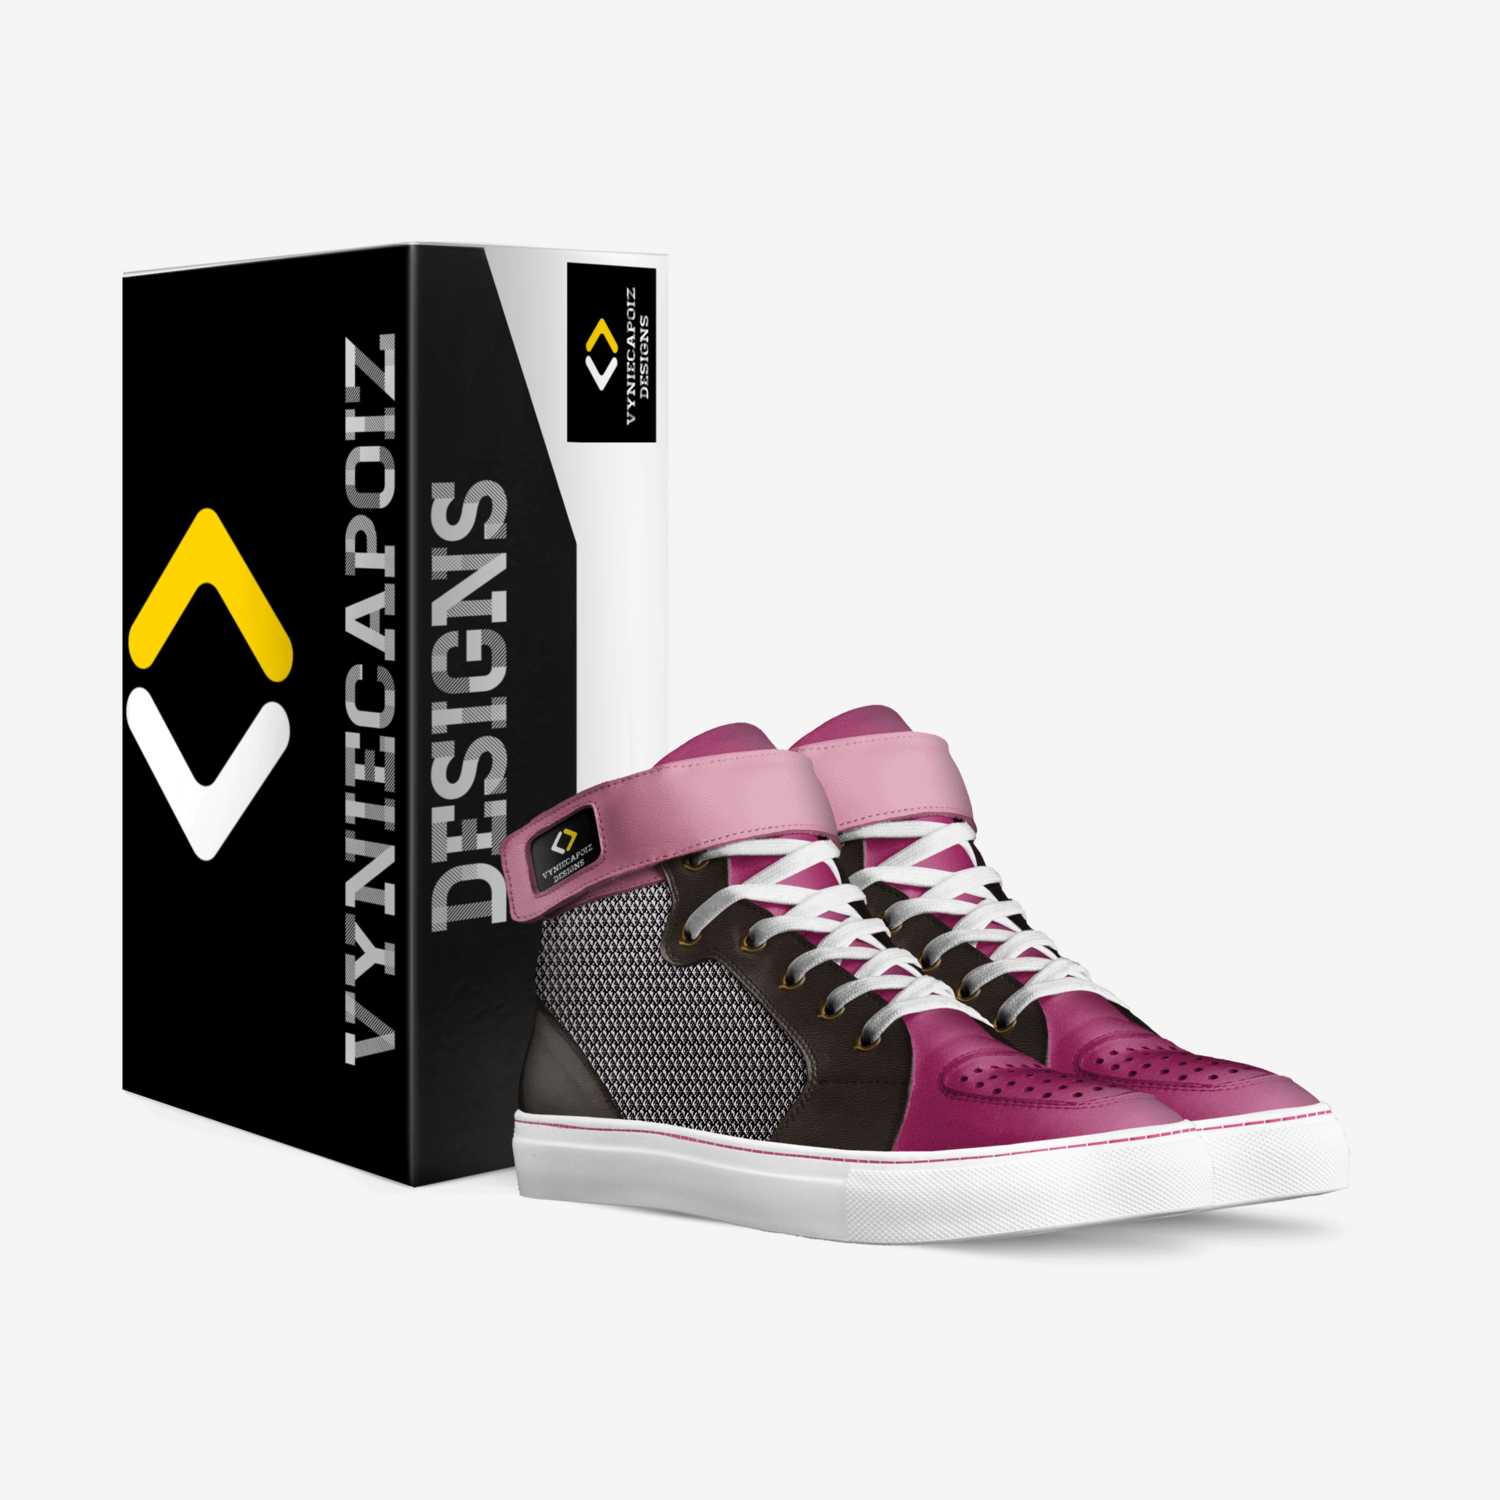 Vyniecapoi'z custom made in Italy shoes by Leslie Gray | Box view